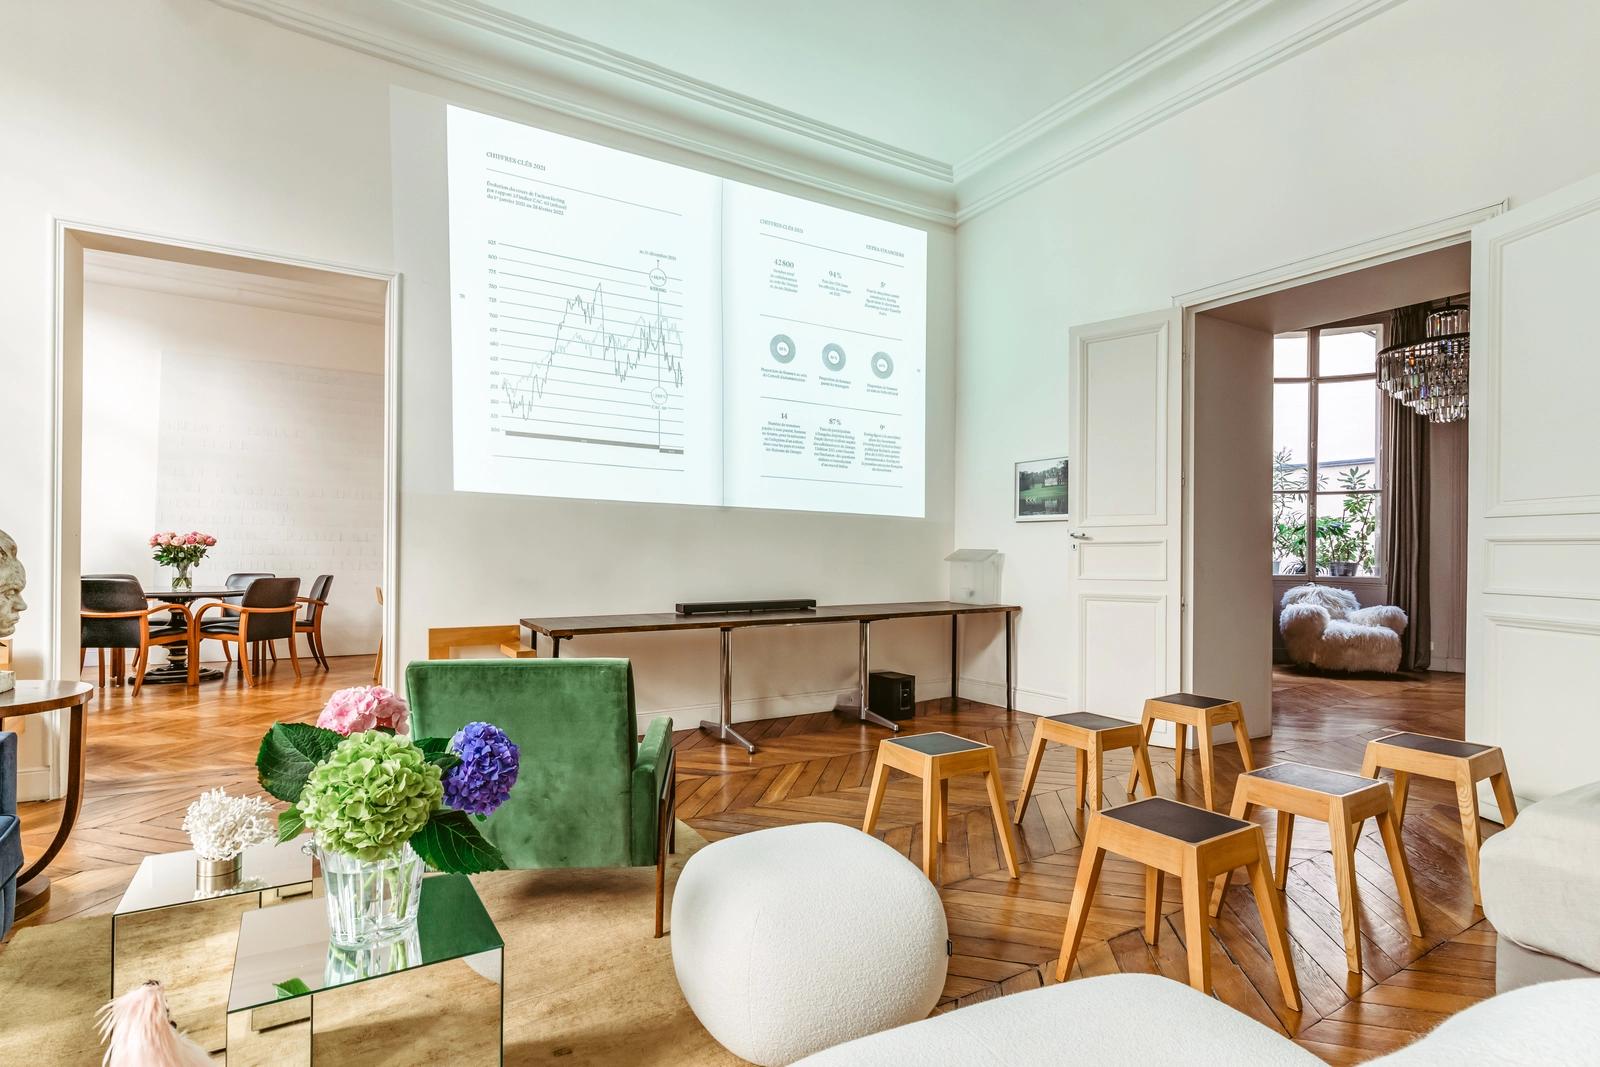 Meeting room in 112m² between La Bourse and the Palais Royal - 1